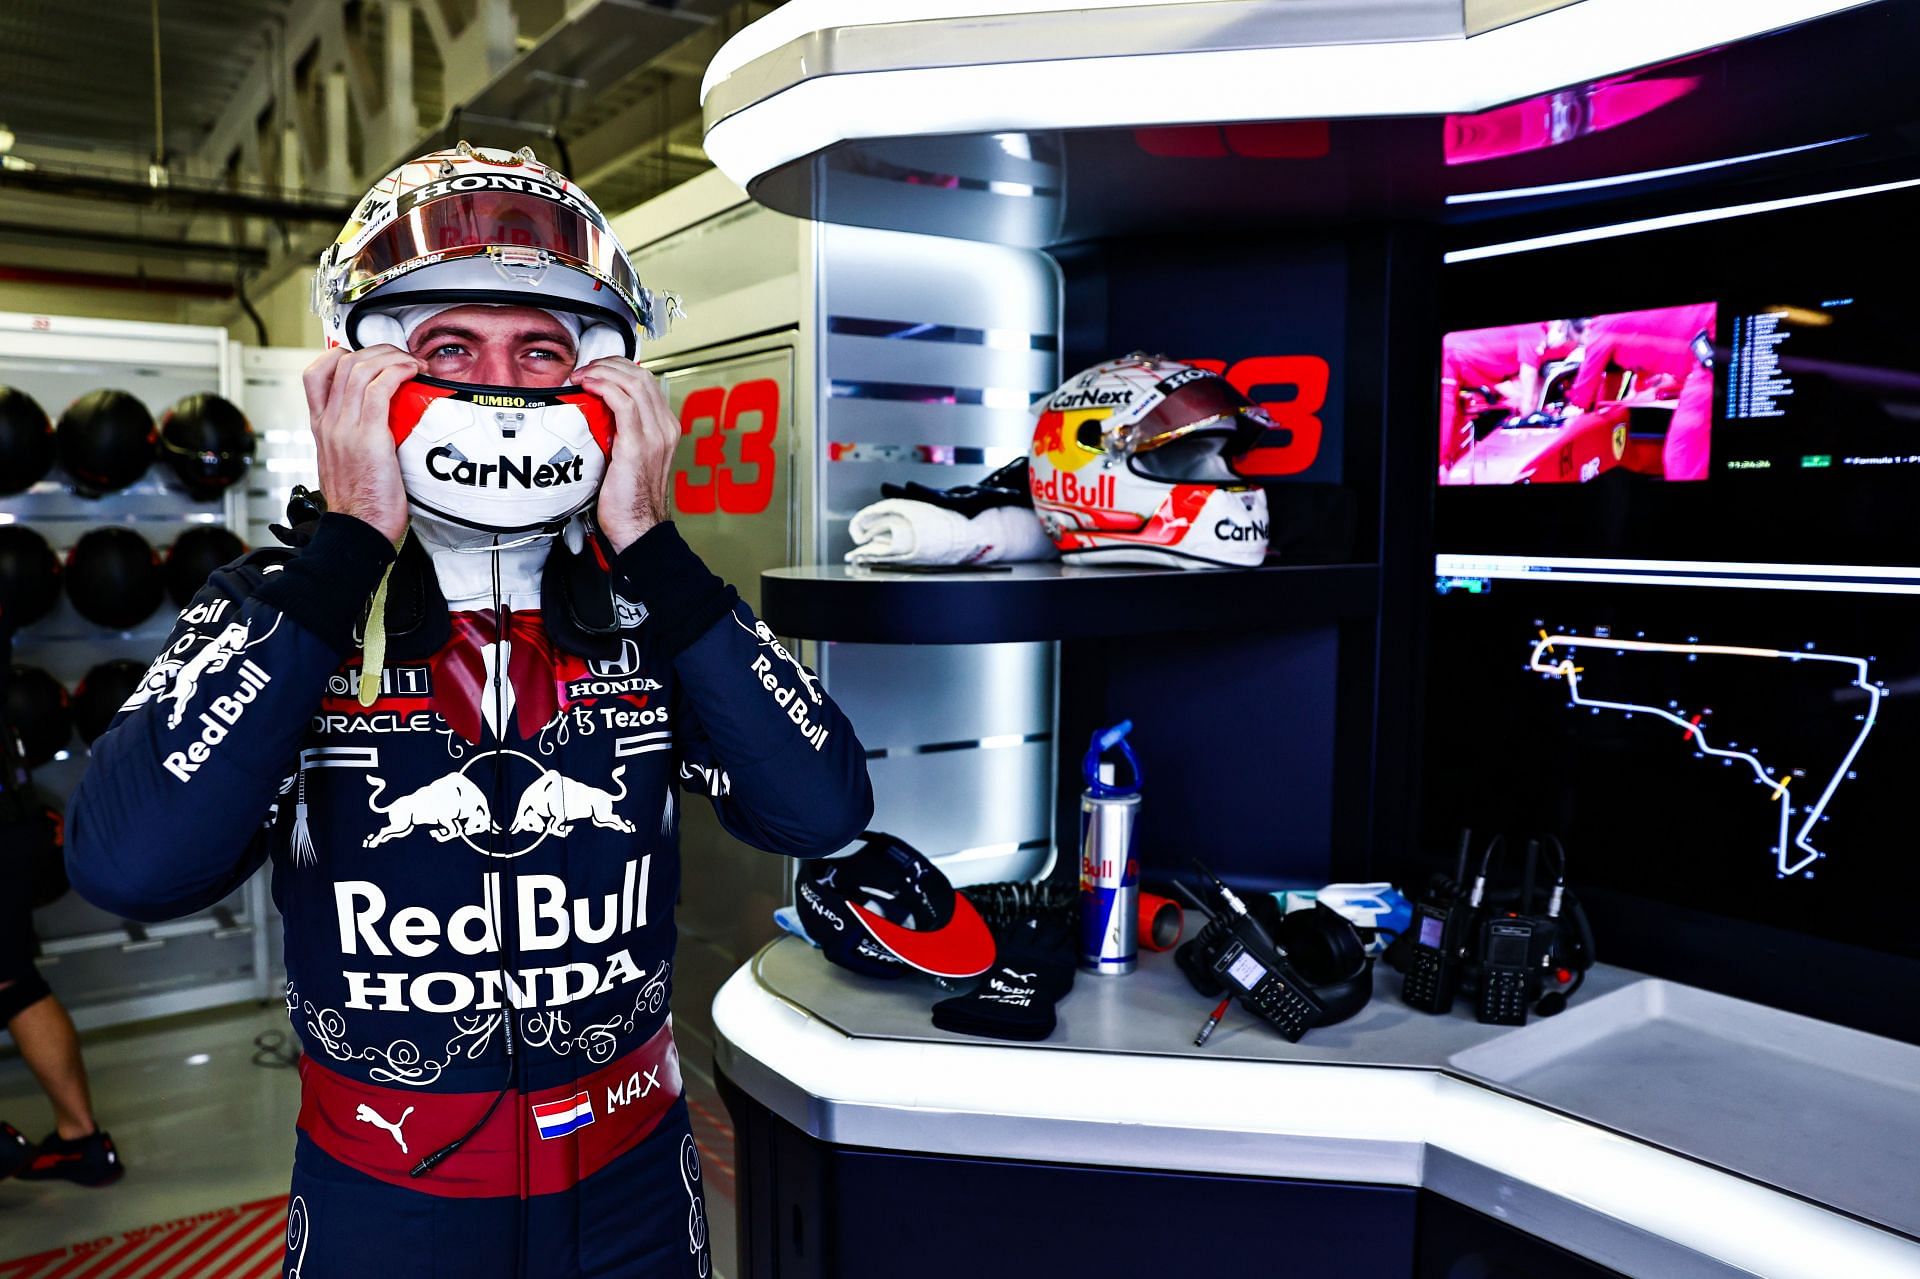 Max Verstappen prepares to drive in the garage during practice ahead of the 2021 Mexican GP. (Photo by Mark Thompson/Getty Images)